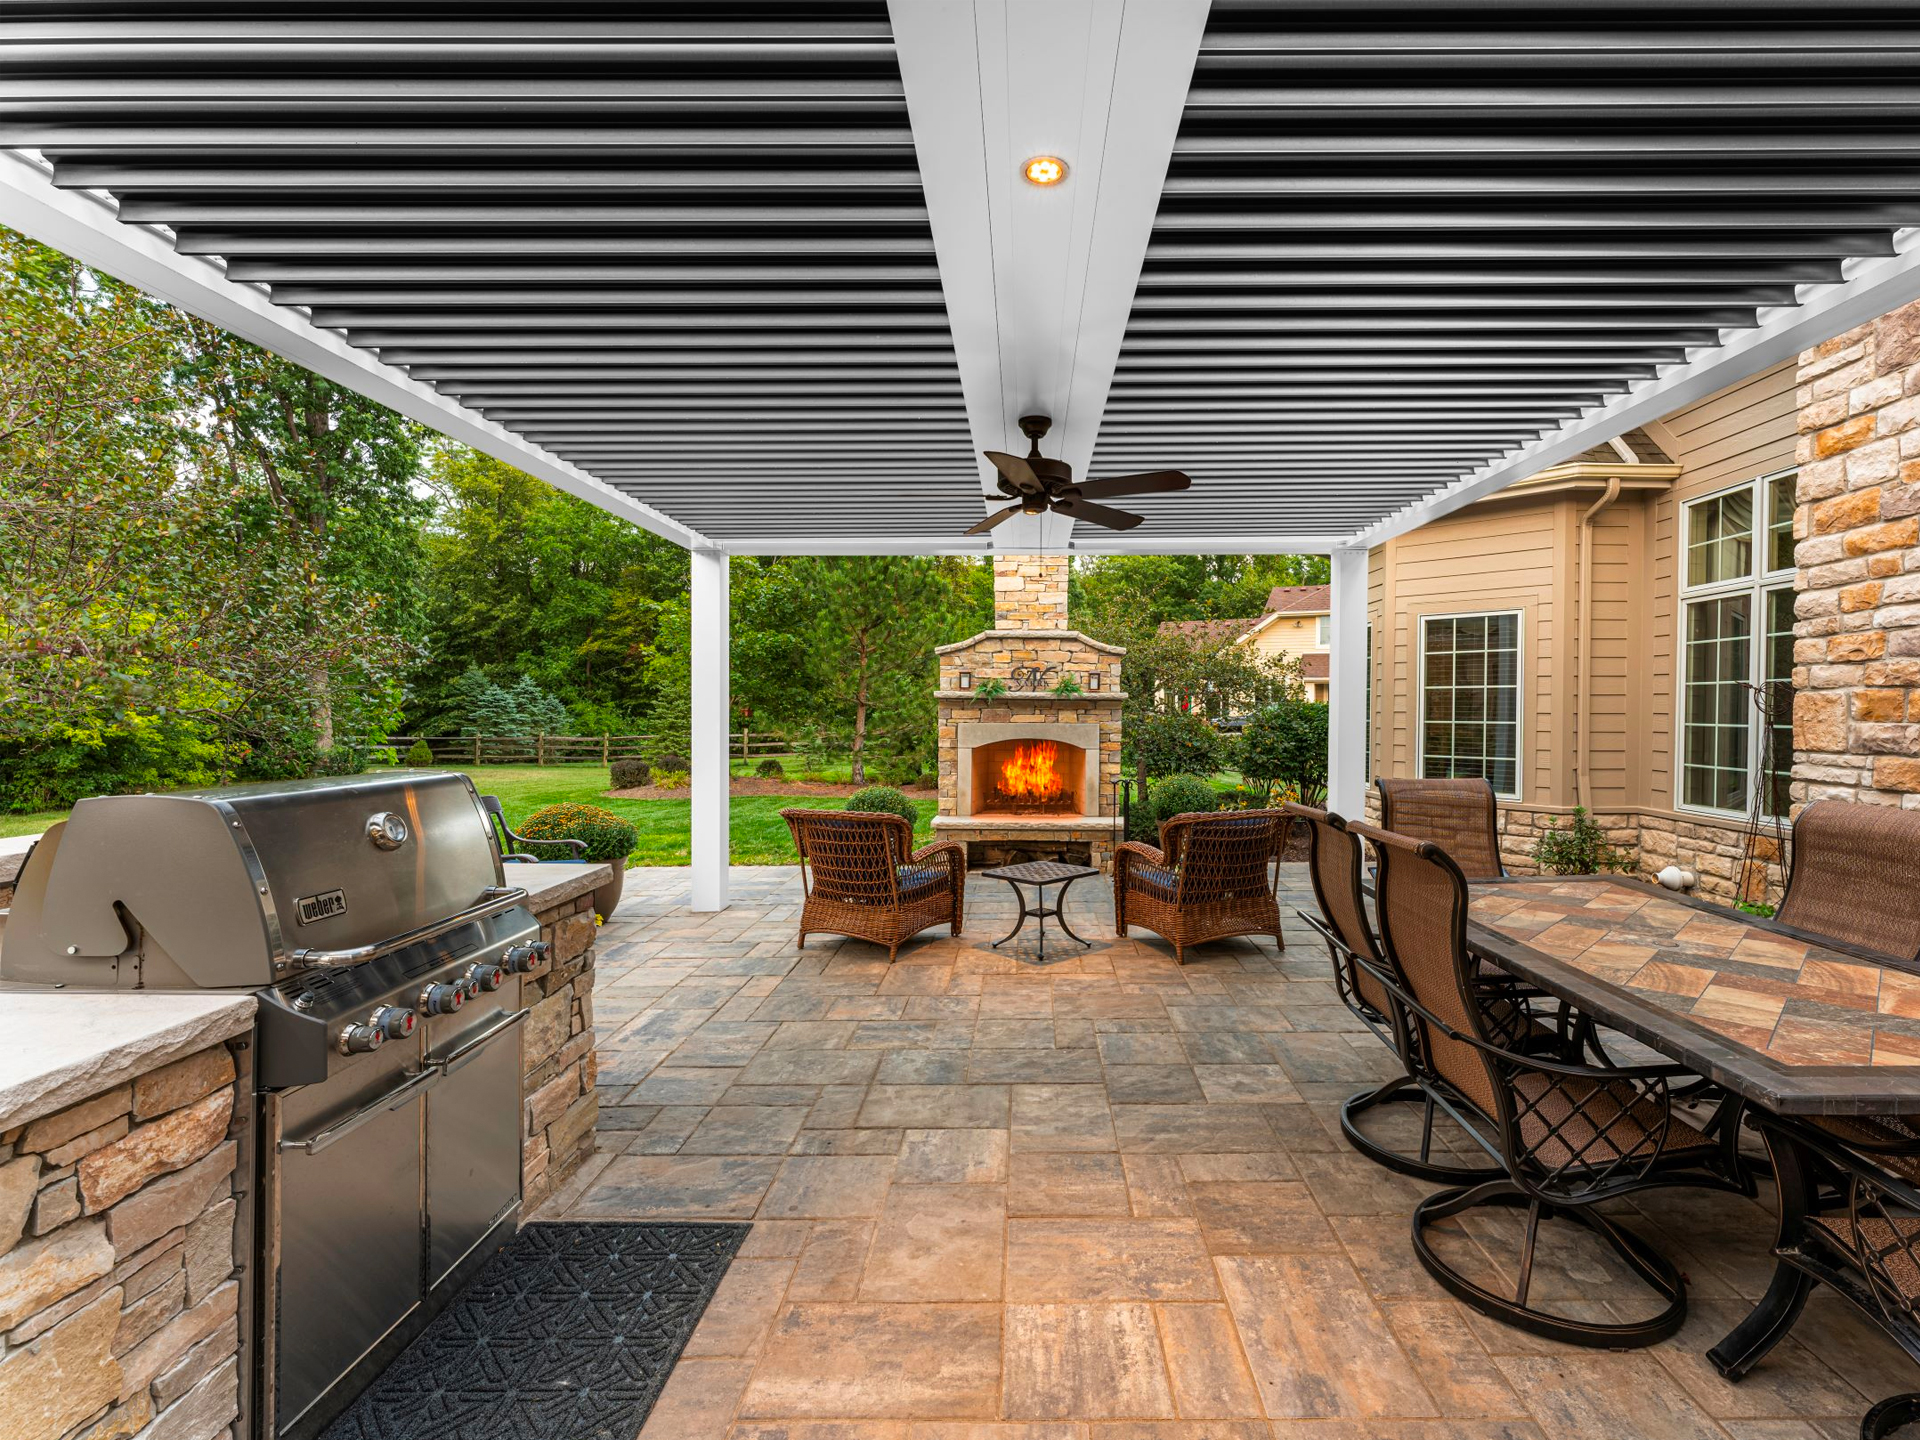 A stone patio covered by a motorized pergola.